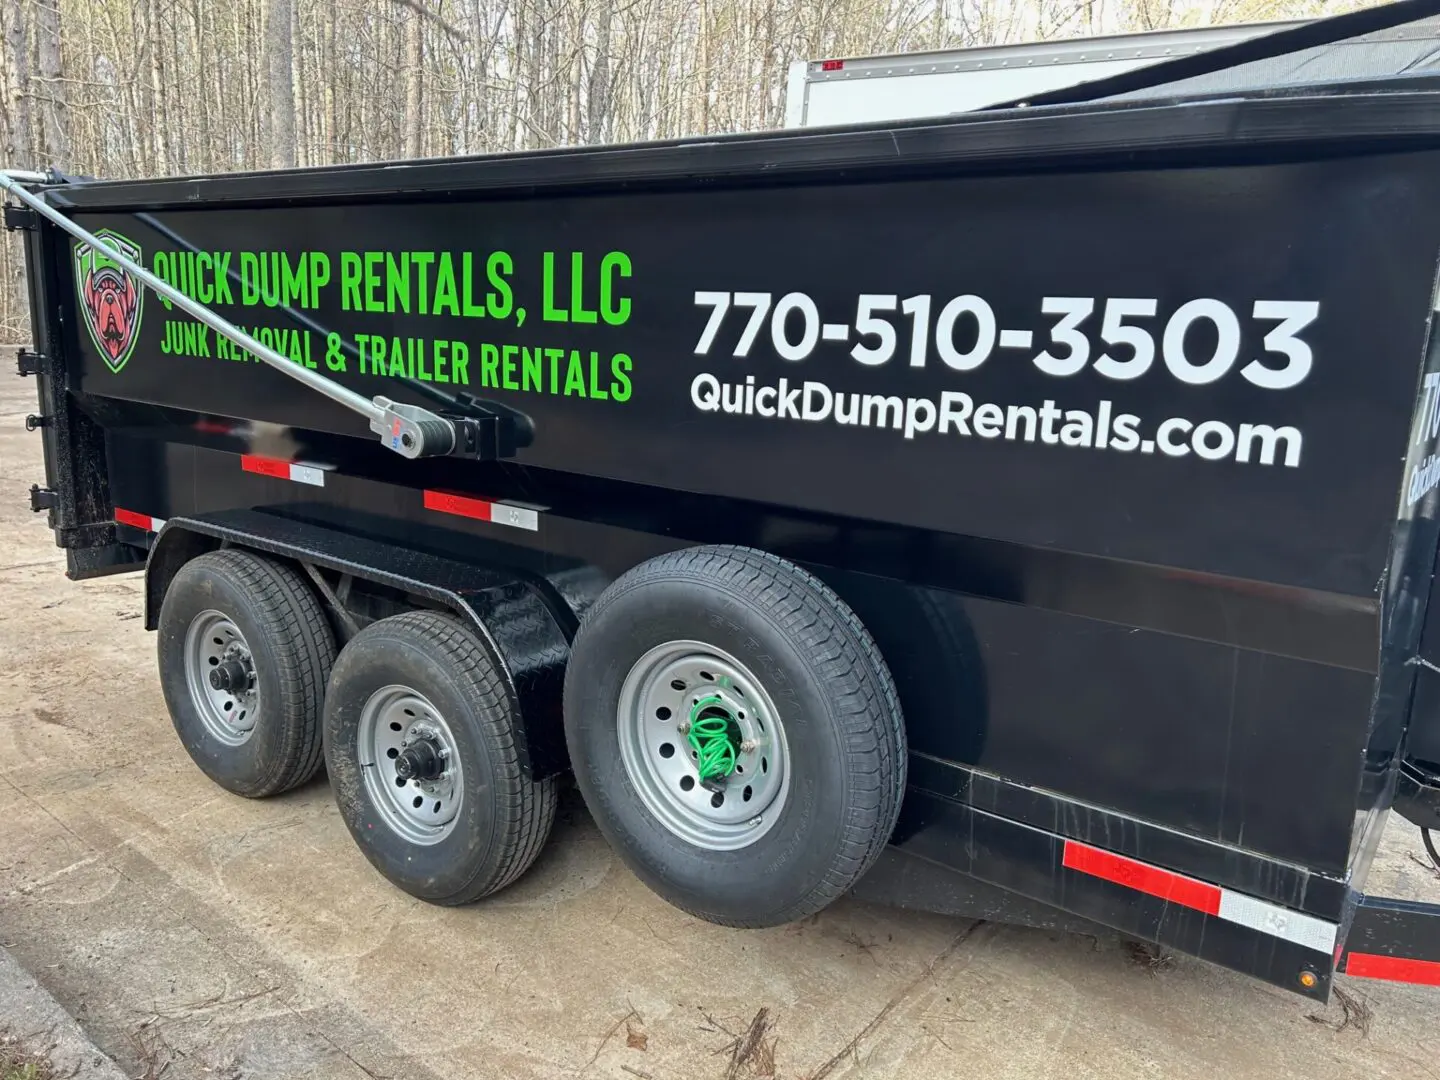 A dump truck with the words " quick dump rentals, llc." on it.